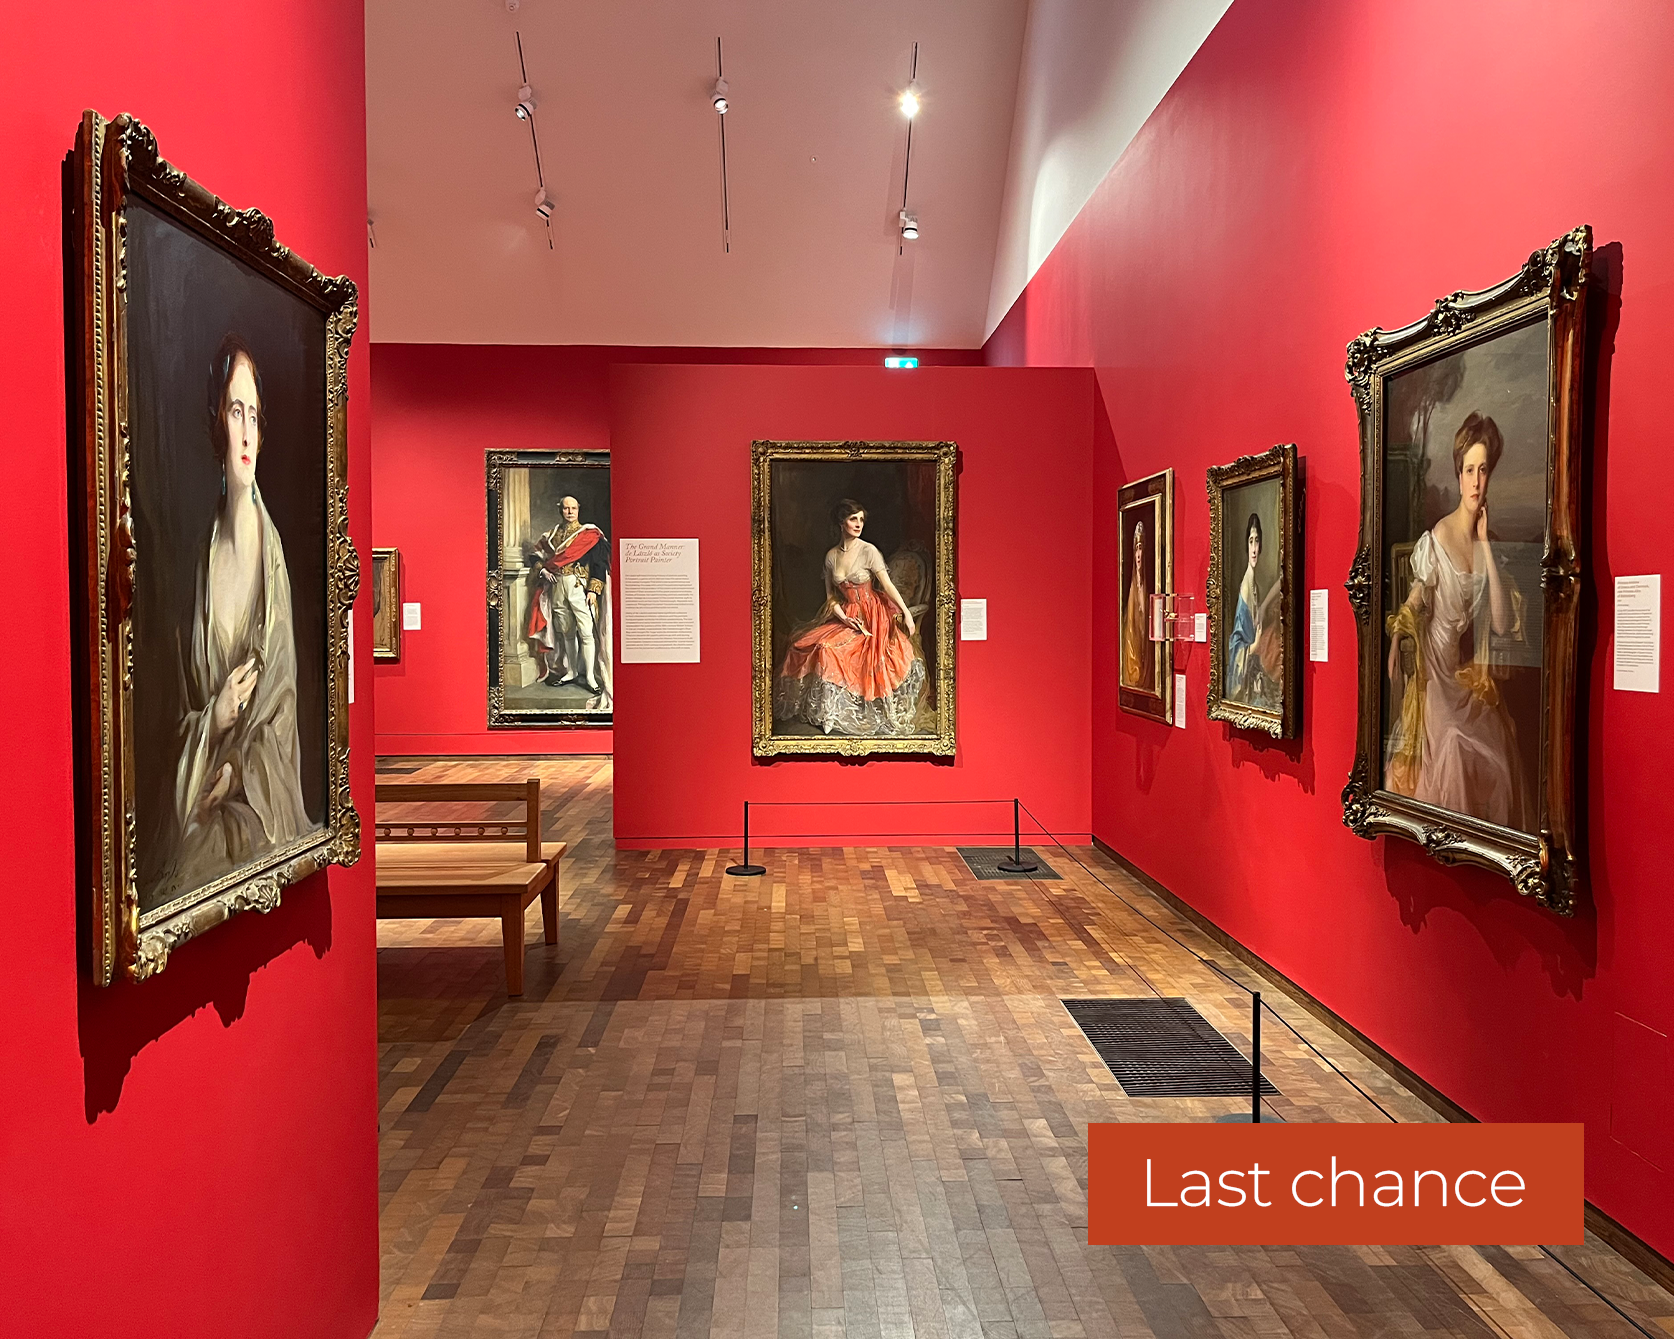 An image of the Philip de László: Master of Elegance exhibition in the Timothy & Mary Clode Gallery at Gainsborough's House. There is an overlayed banner in the bottom right corner which reads: Last chance.